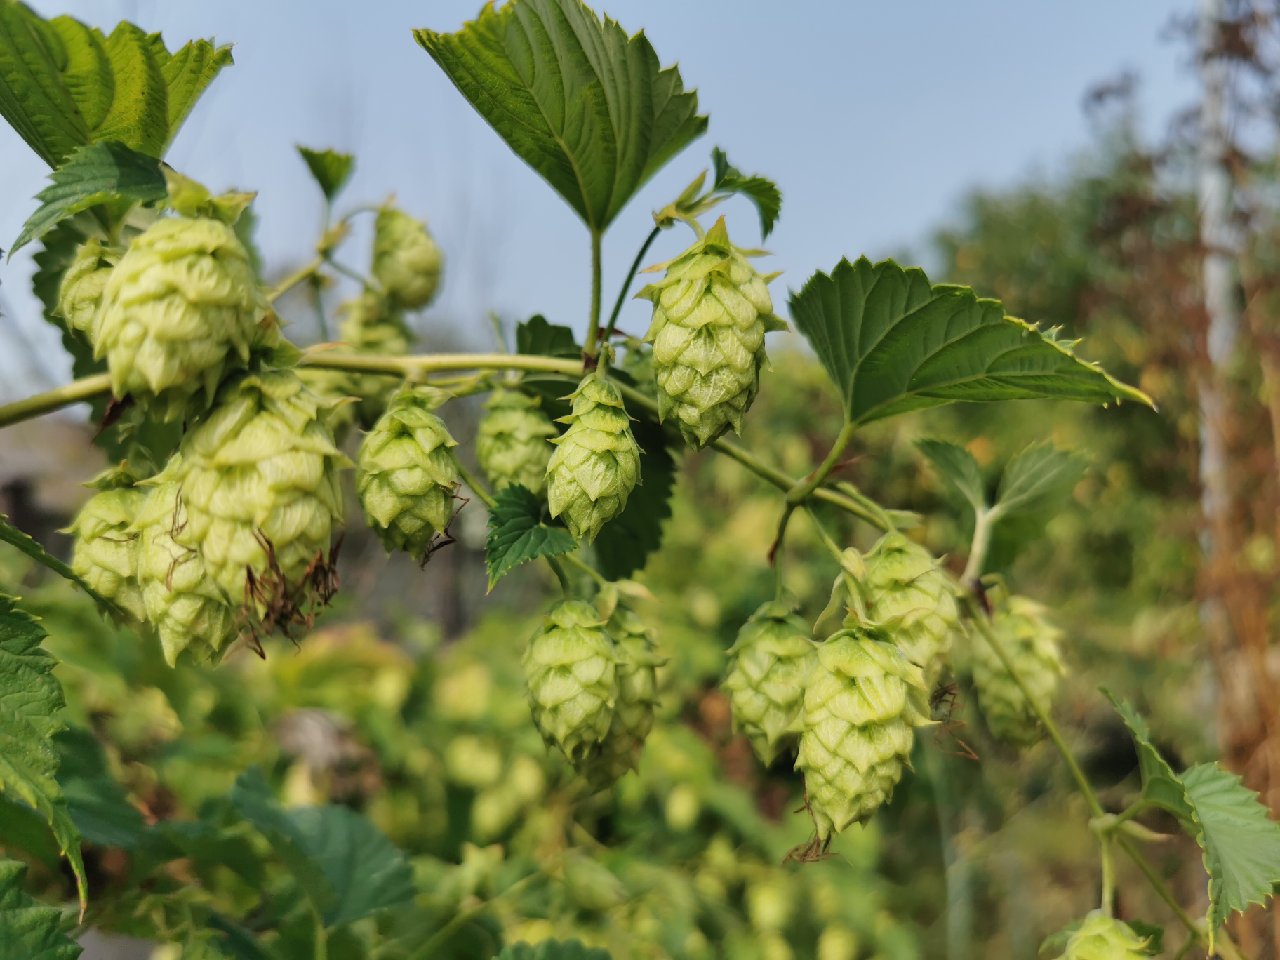 Beautiful hops, ripe and ready for the picking.